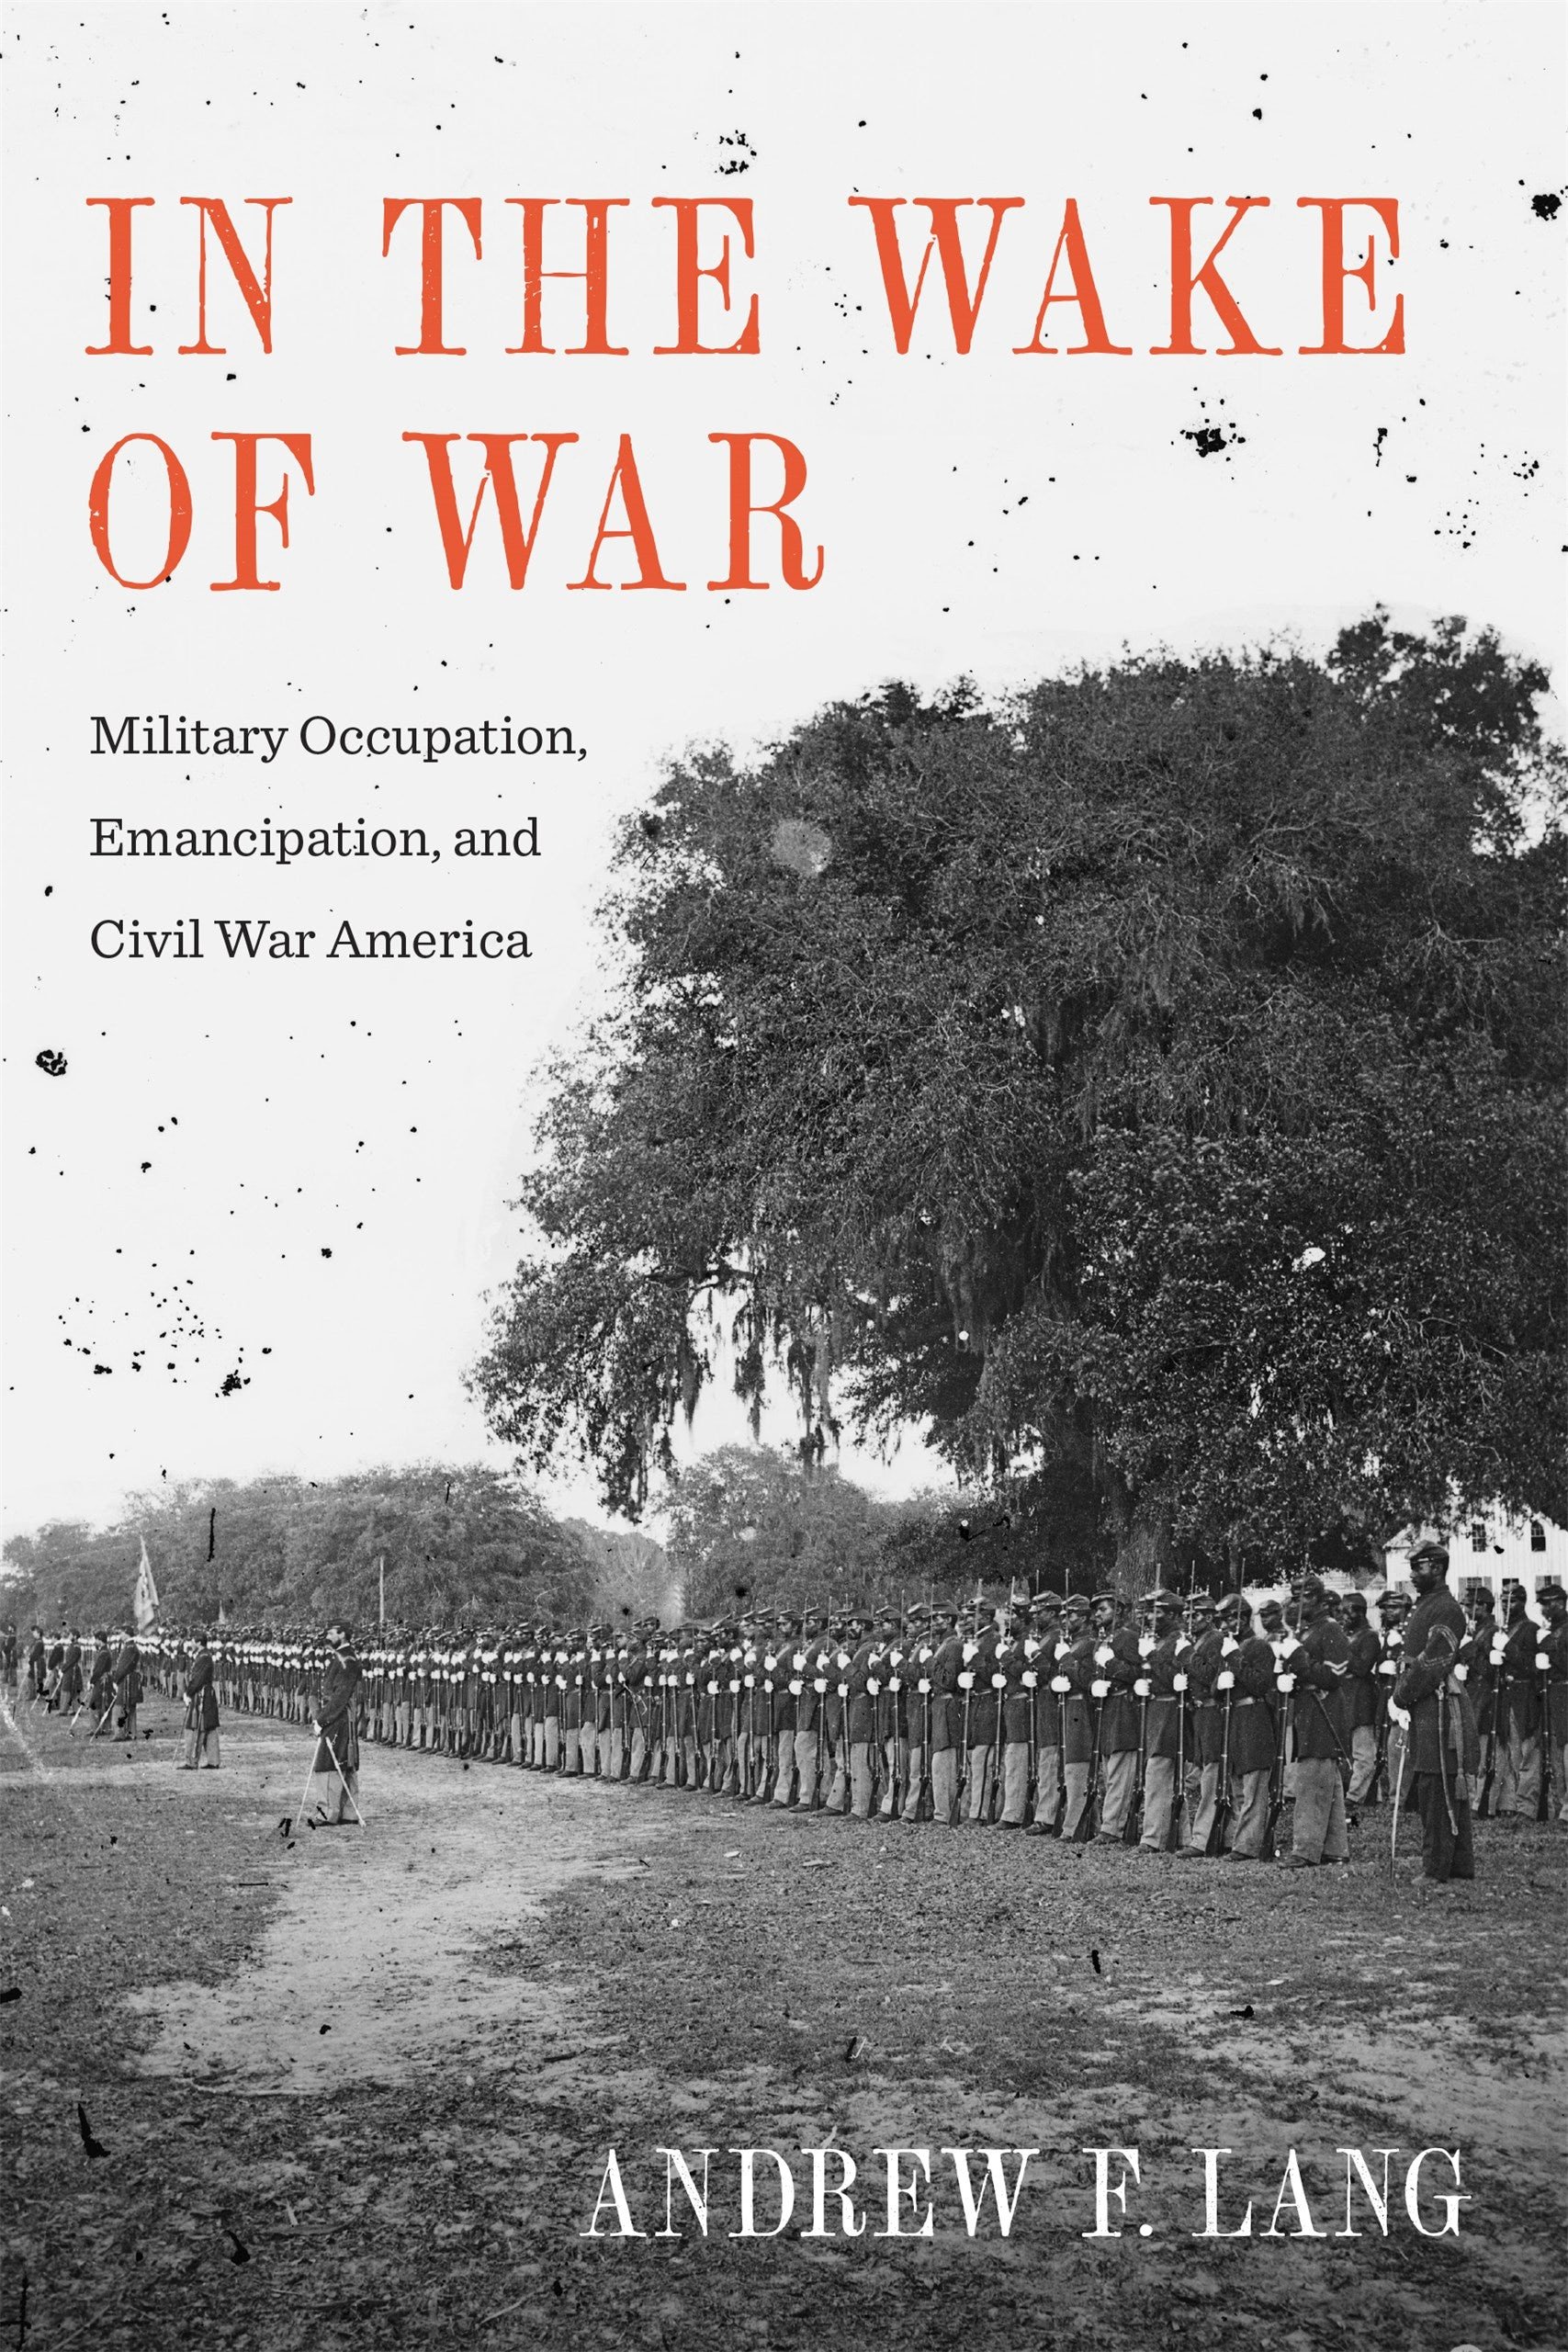 North Carolina Historical Review - In the Wake of War